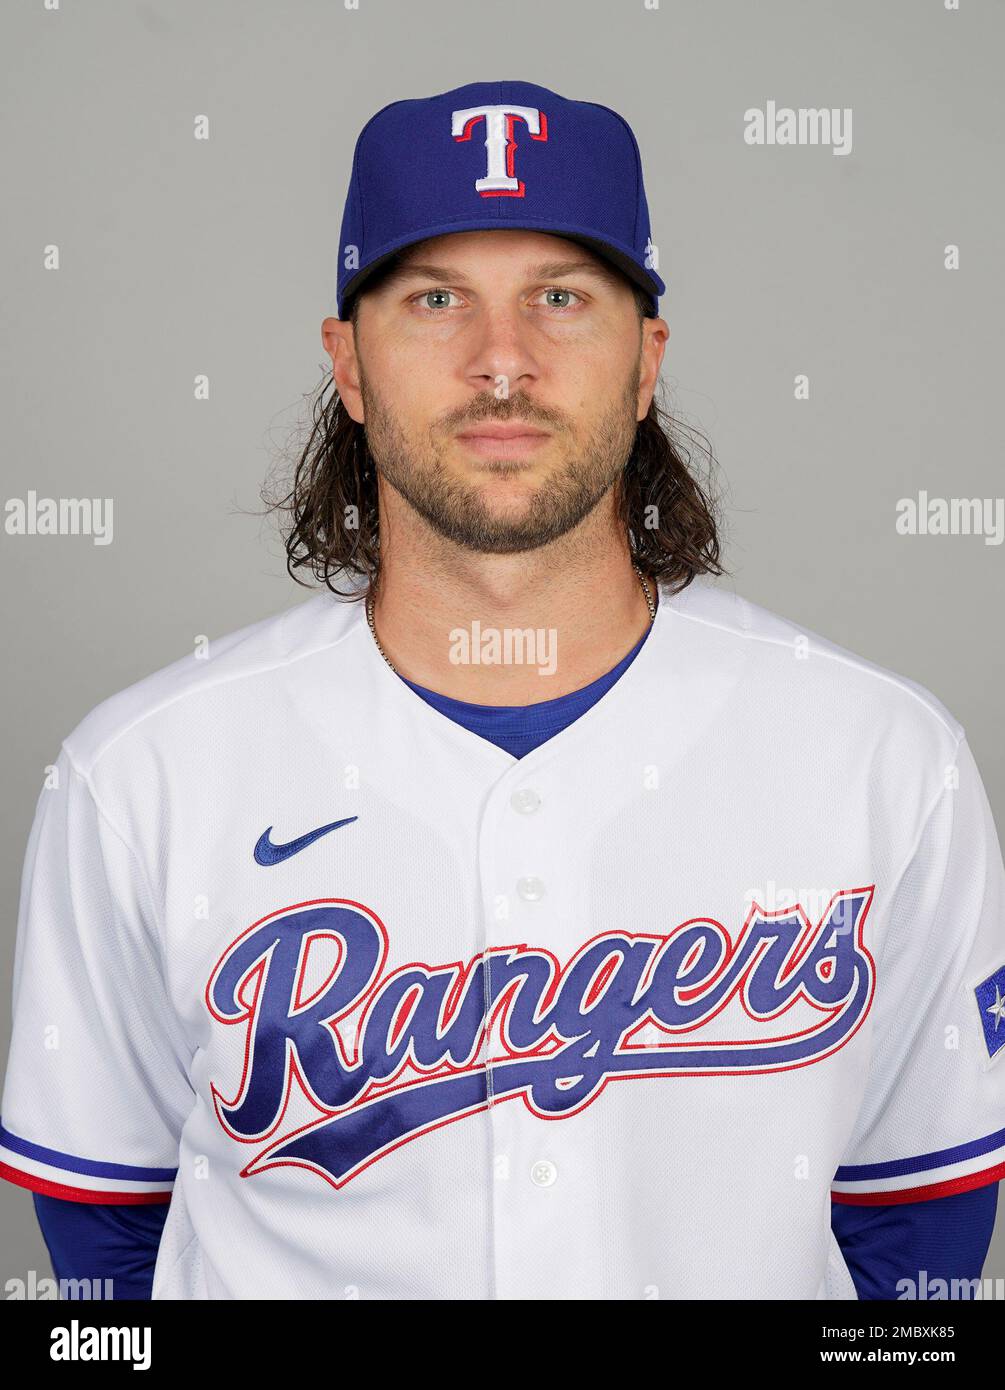 This is a 2022 photo of Jake Marisnick of the Texas Rangers baseball team.  This image reflects the Texas Rangers active roster as of Thursday, March  17, 2022 when this image was